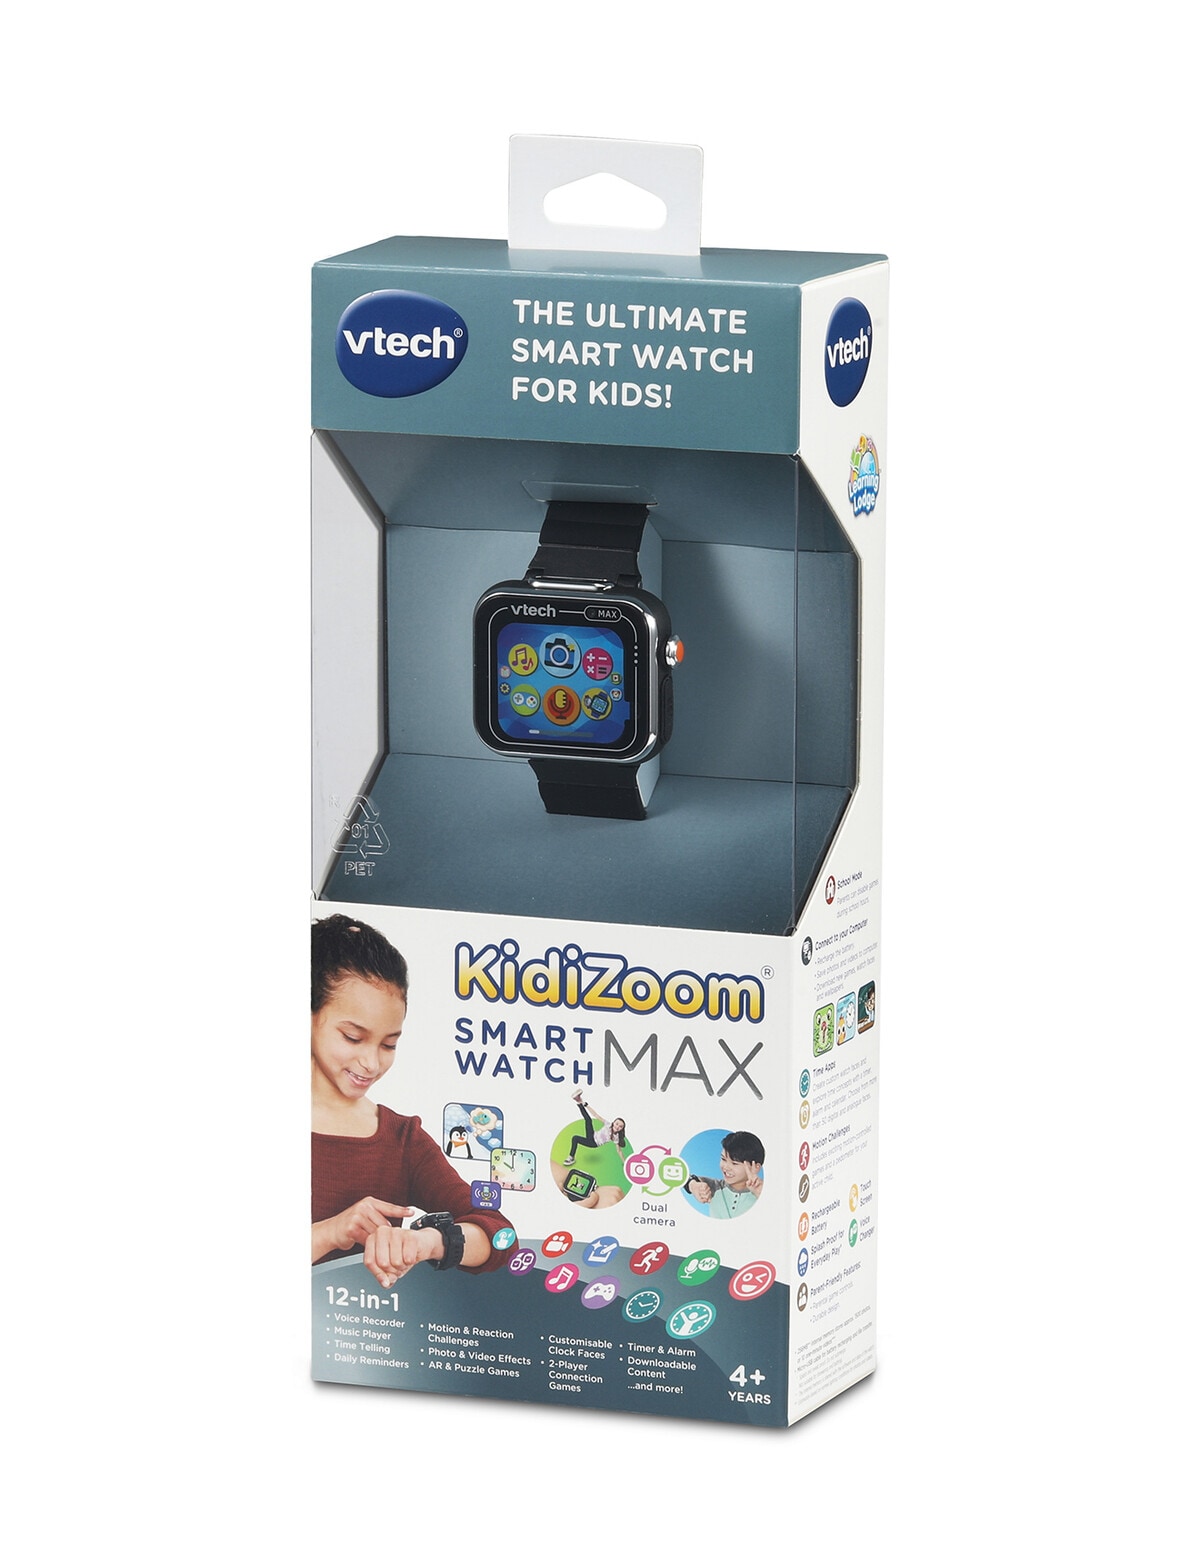 Vtech Kidizoom Smartwatch Max, Black - Science & Electronic Toys